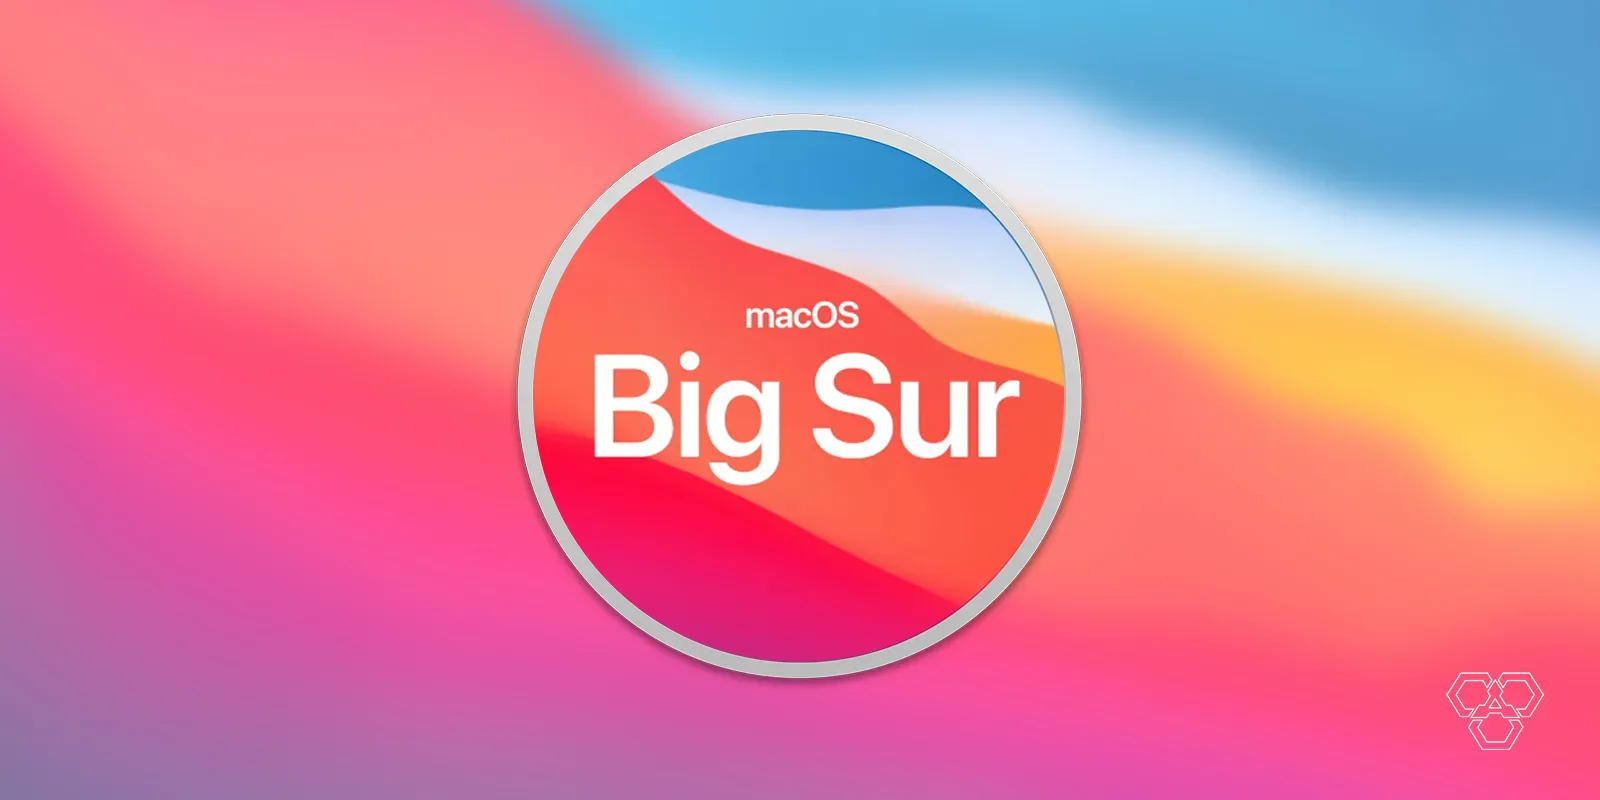 Macos Big Sur Is Now Available To Download